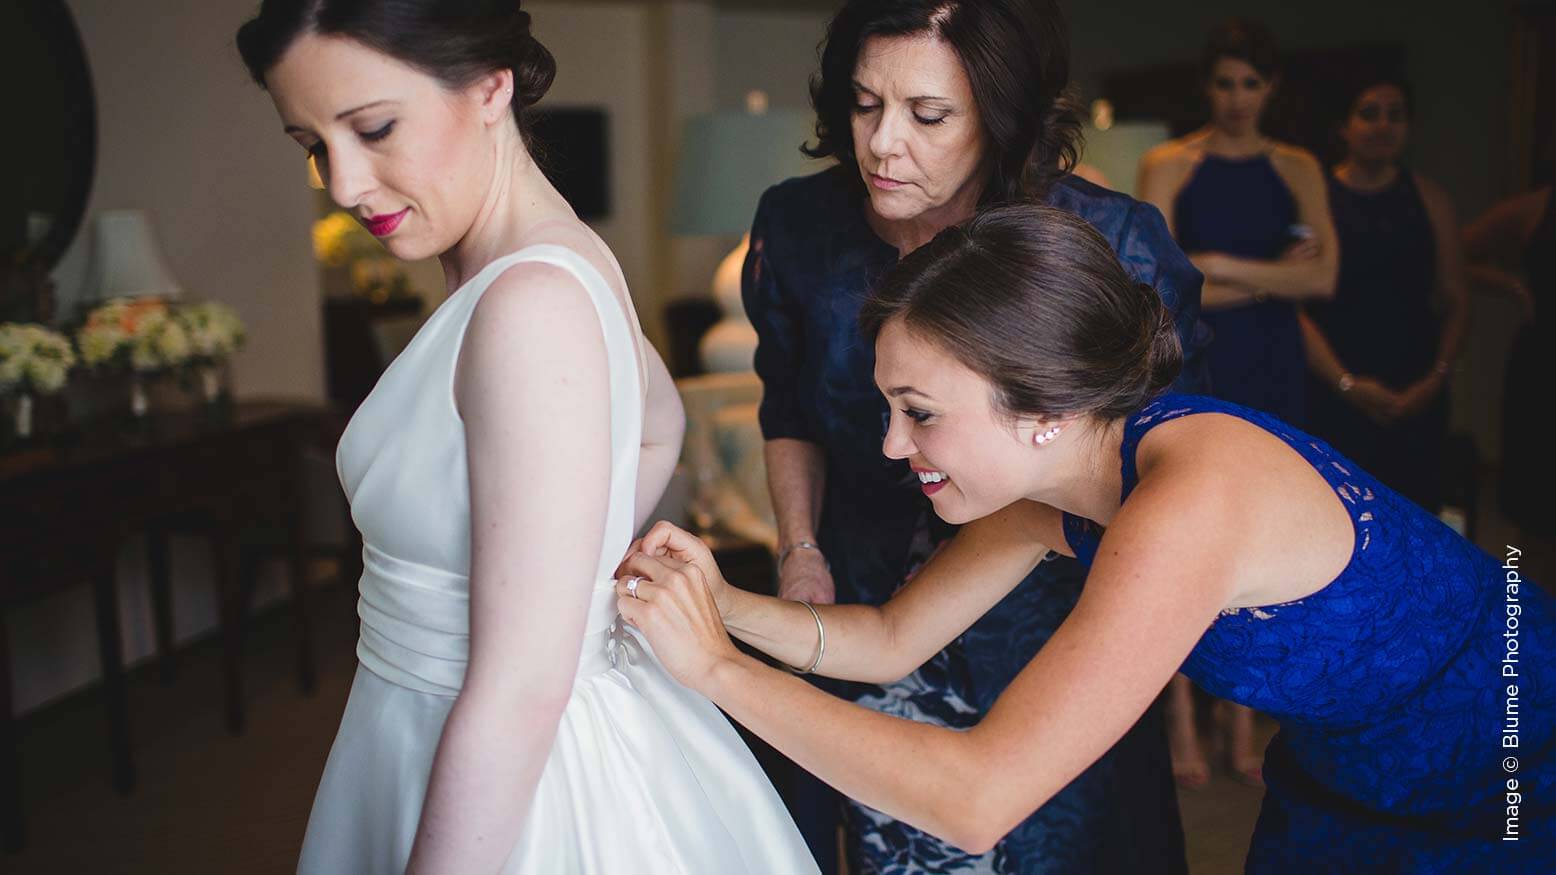 10 Must-Have Shots on a Wedding Day